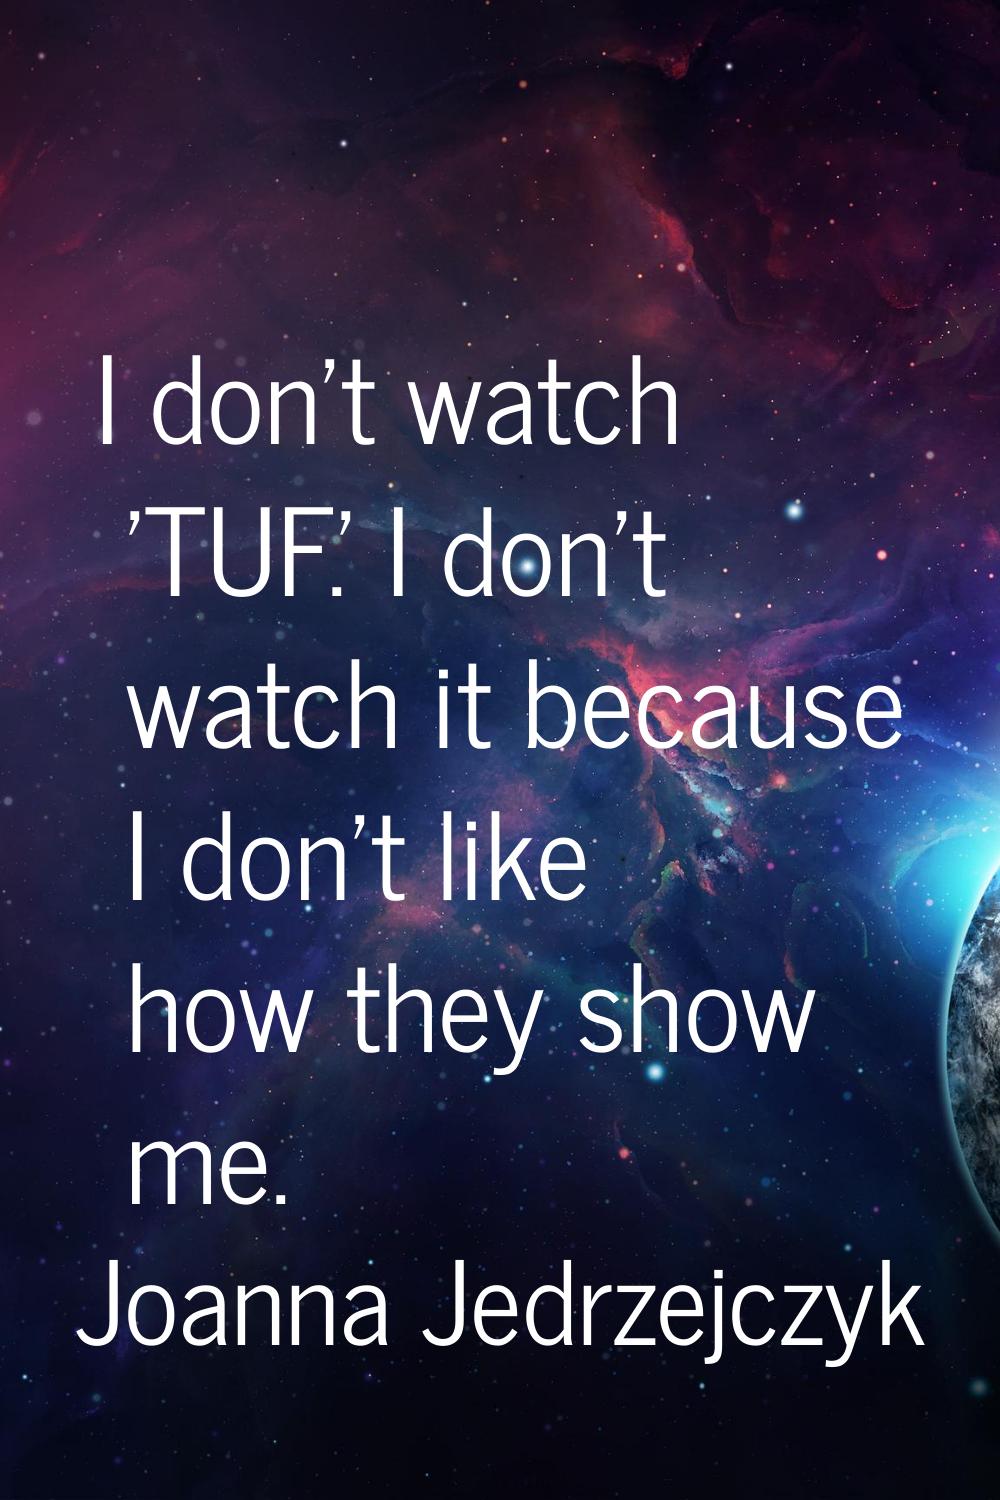 I don't watch 'TUF.' I don't watch it because I don't like how they show me.